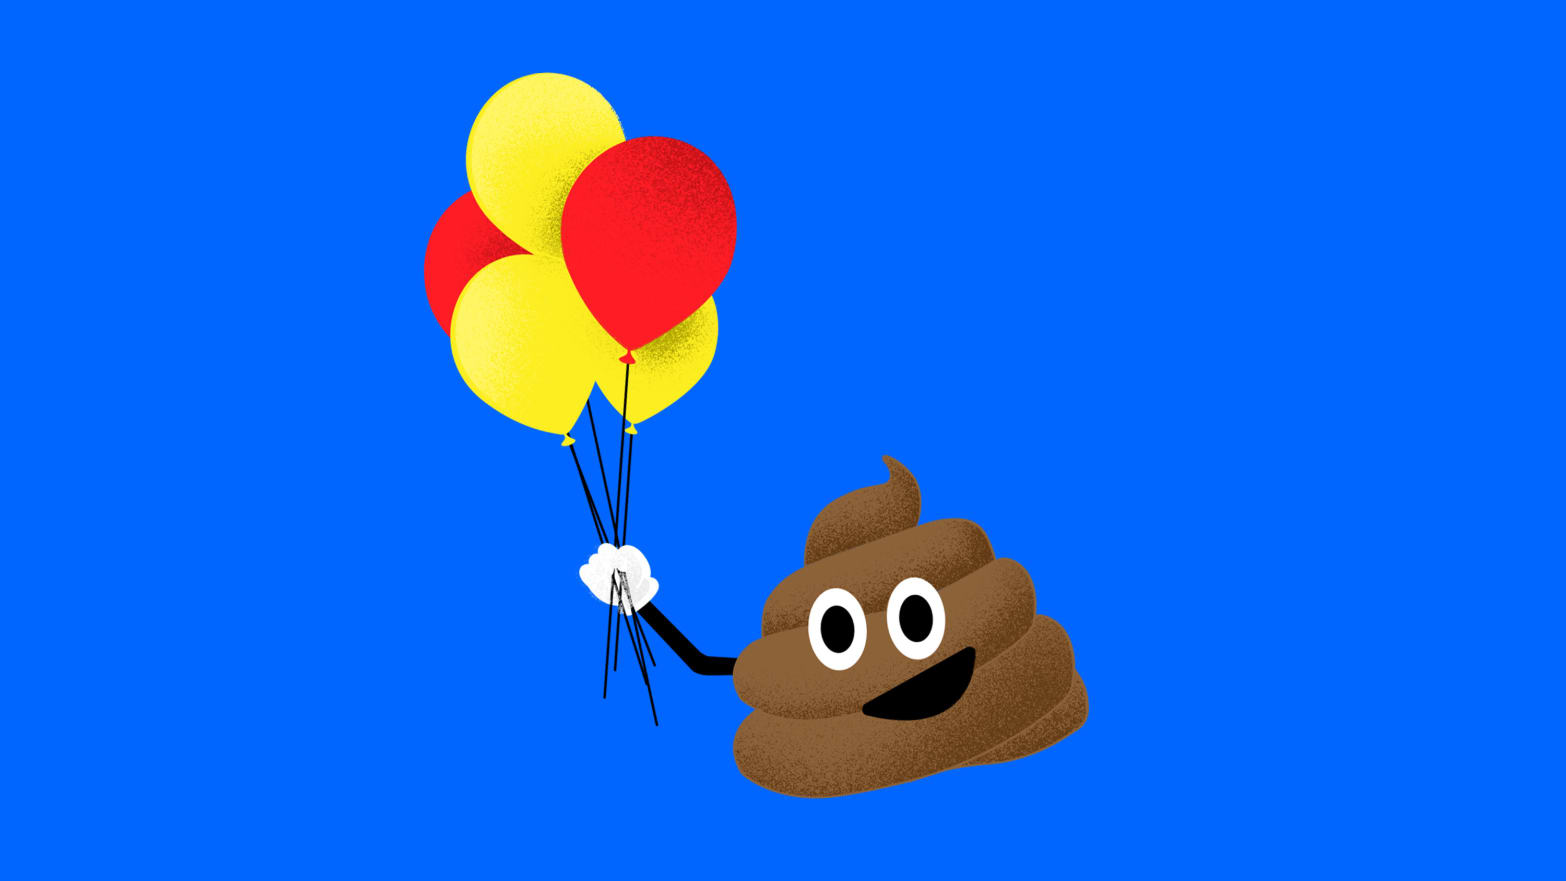 An illustration of a poop emoji holding balloons